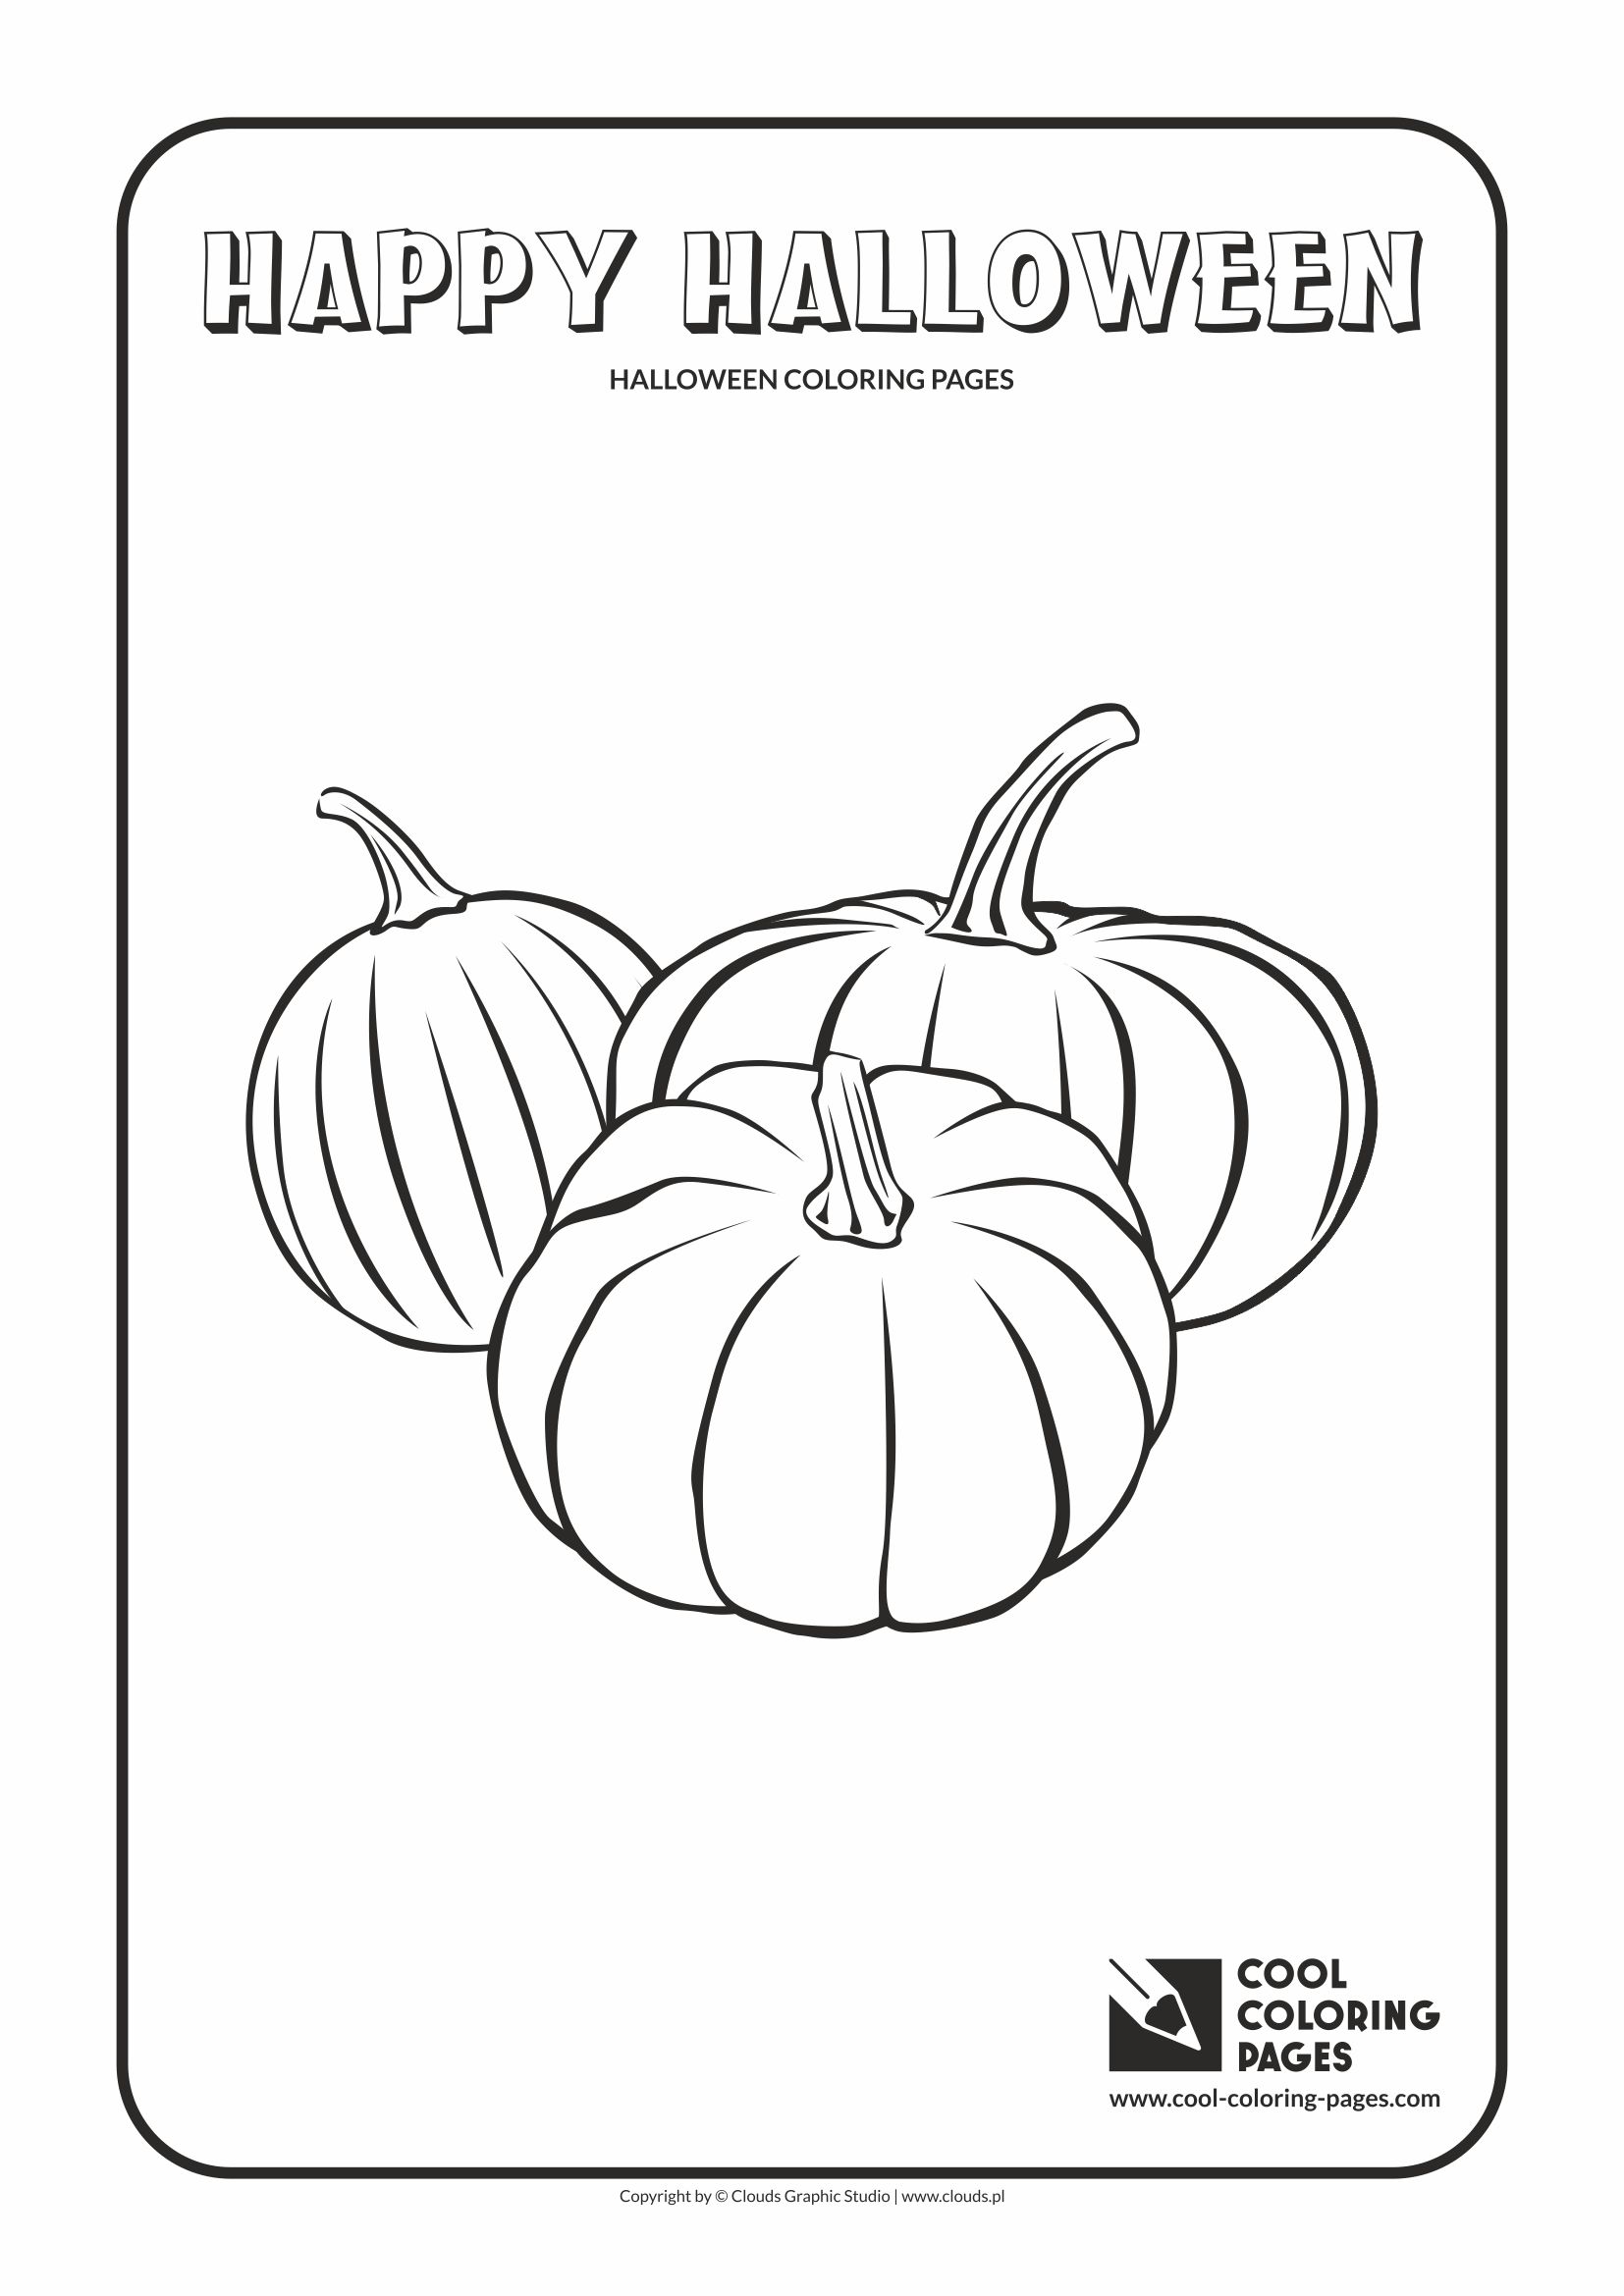 Cool Coloring Pages - Holidays / Halloween pumpkins / Coloring page with Halloween pumpkins